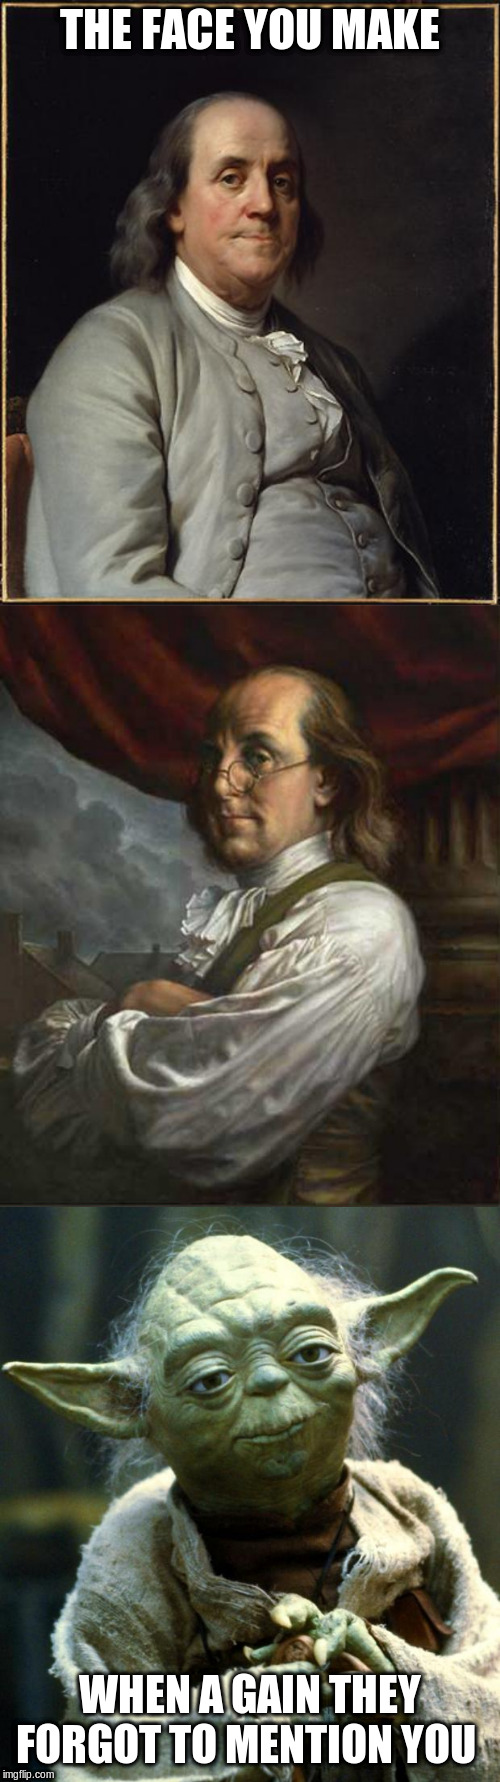 THE FACE YOU MAKE WHEN A GAIN THEY FORGOT TO MENTION YOU | image tagged in memes,star wars yoda,benjamin franklin | made w/ Imgflip meme maker